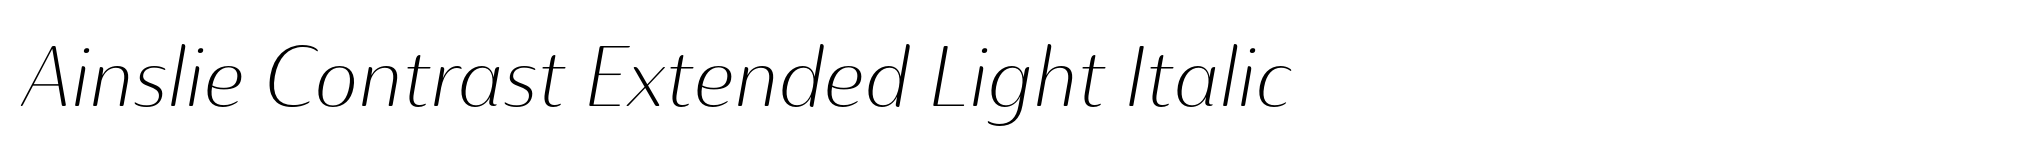 Ainslie Contrast Extended Light Italic image